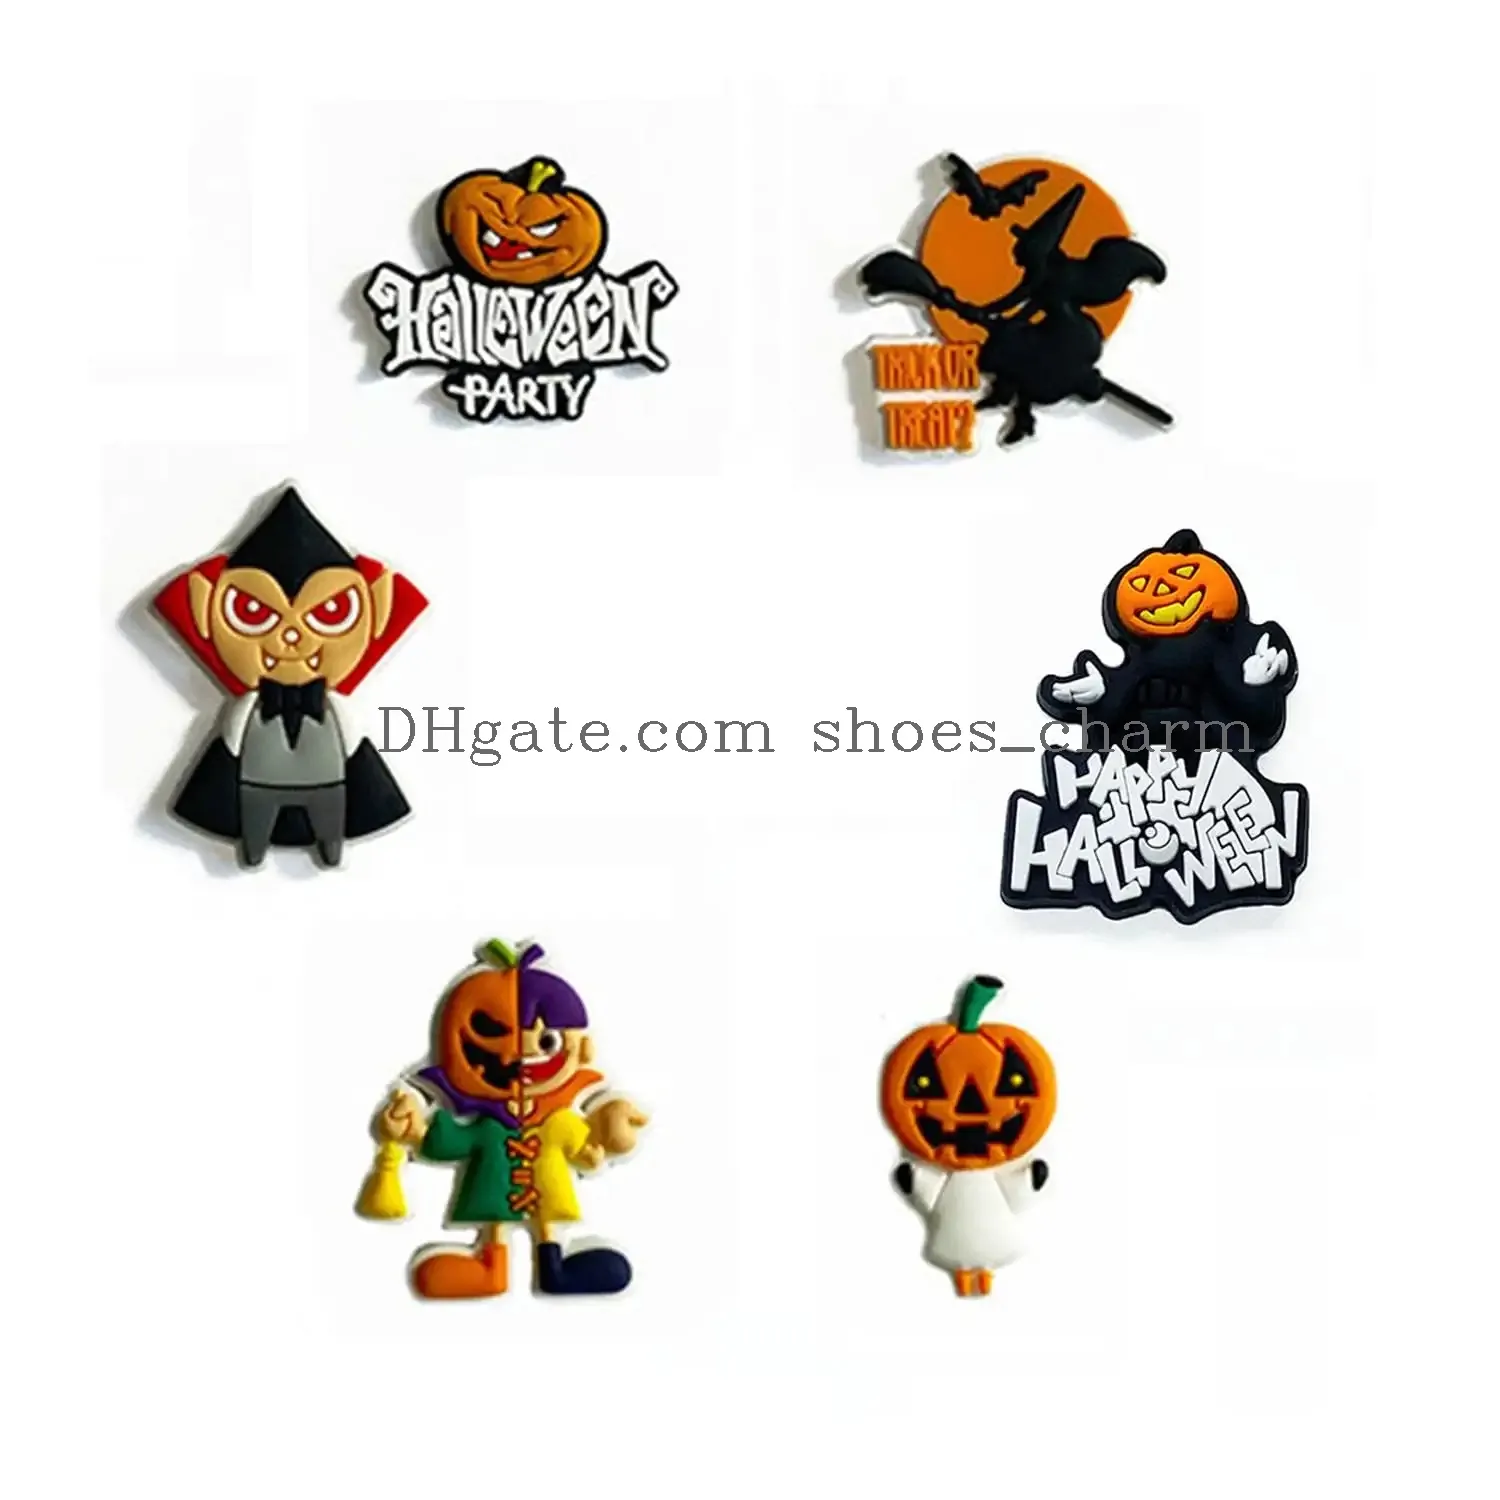 skull pumpkin clog shoe decoration charms halloween horror shoe accessories for kid boy and girl adult women men party favor gifts